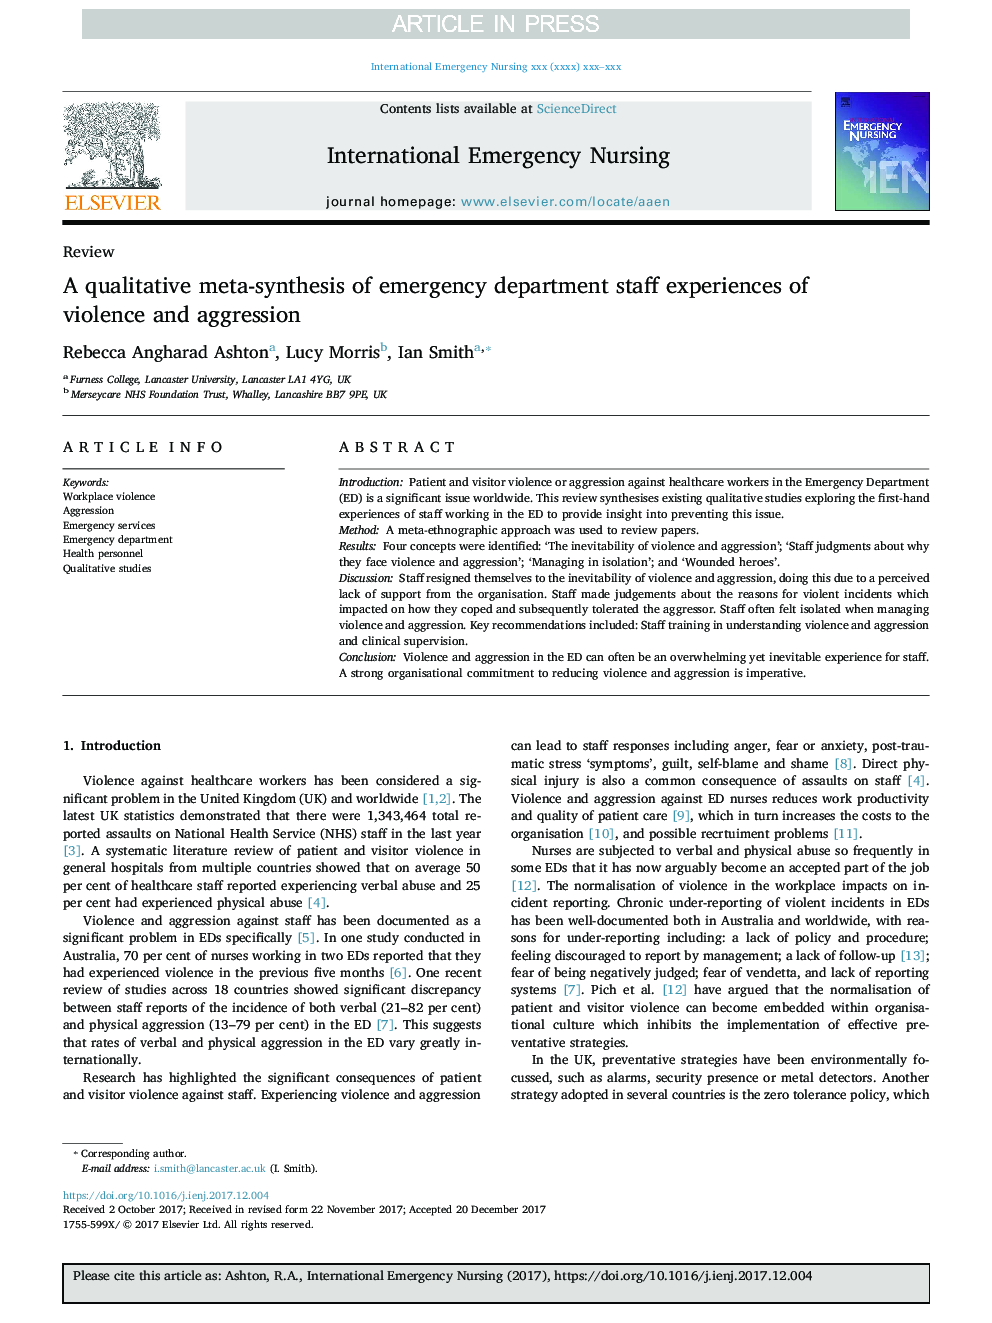 A qualitative meta-synthesis of emergency department staff experiences of violence and aggression